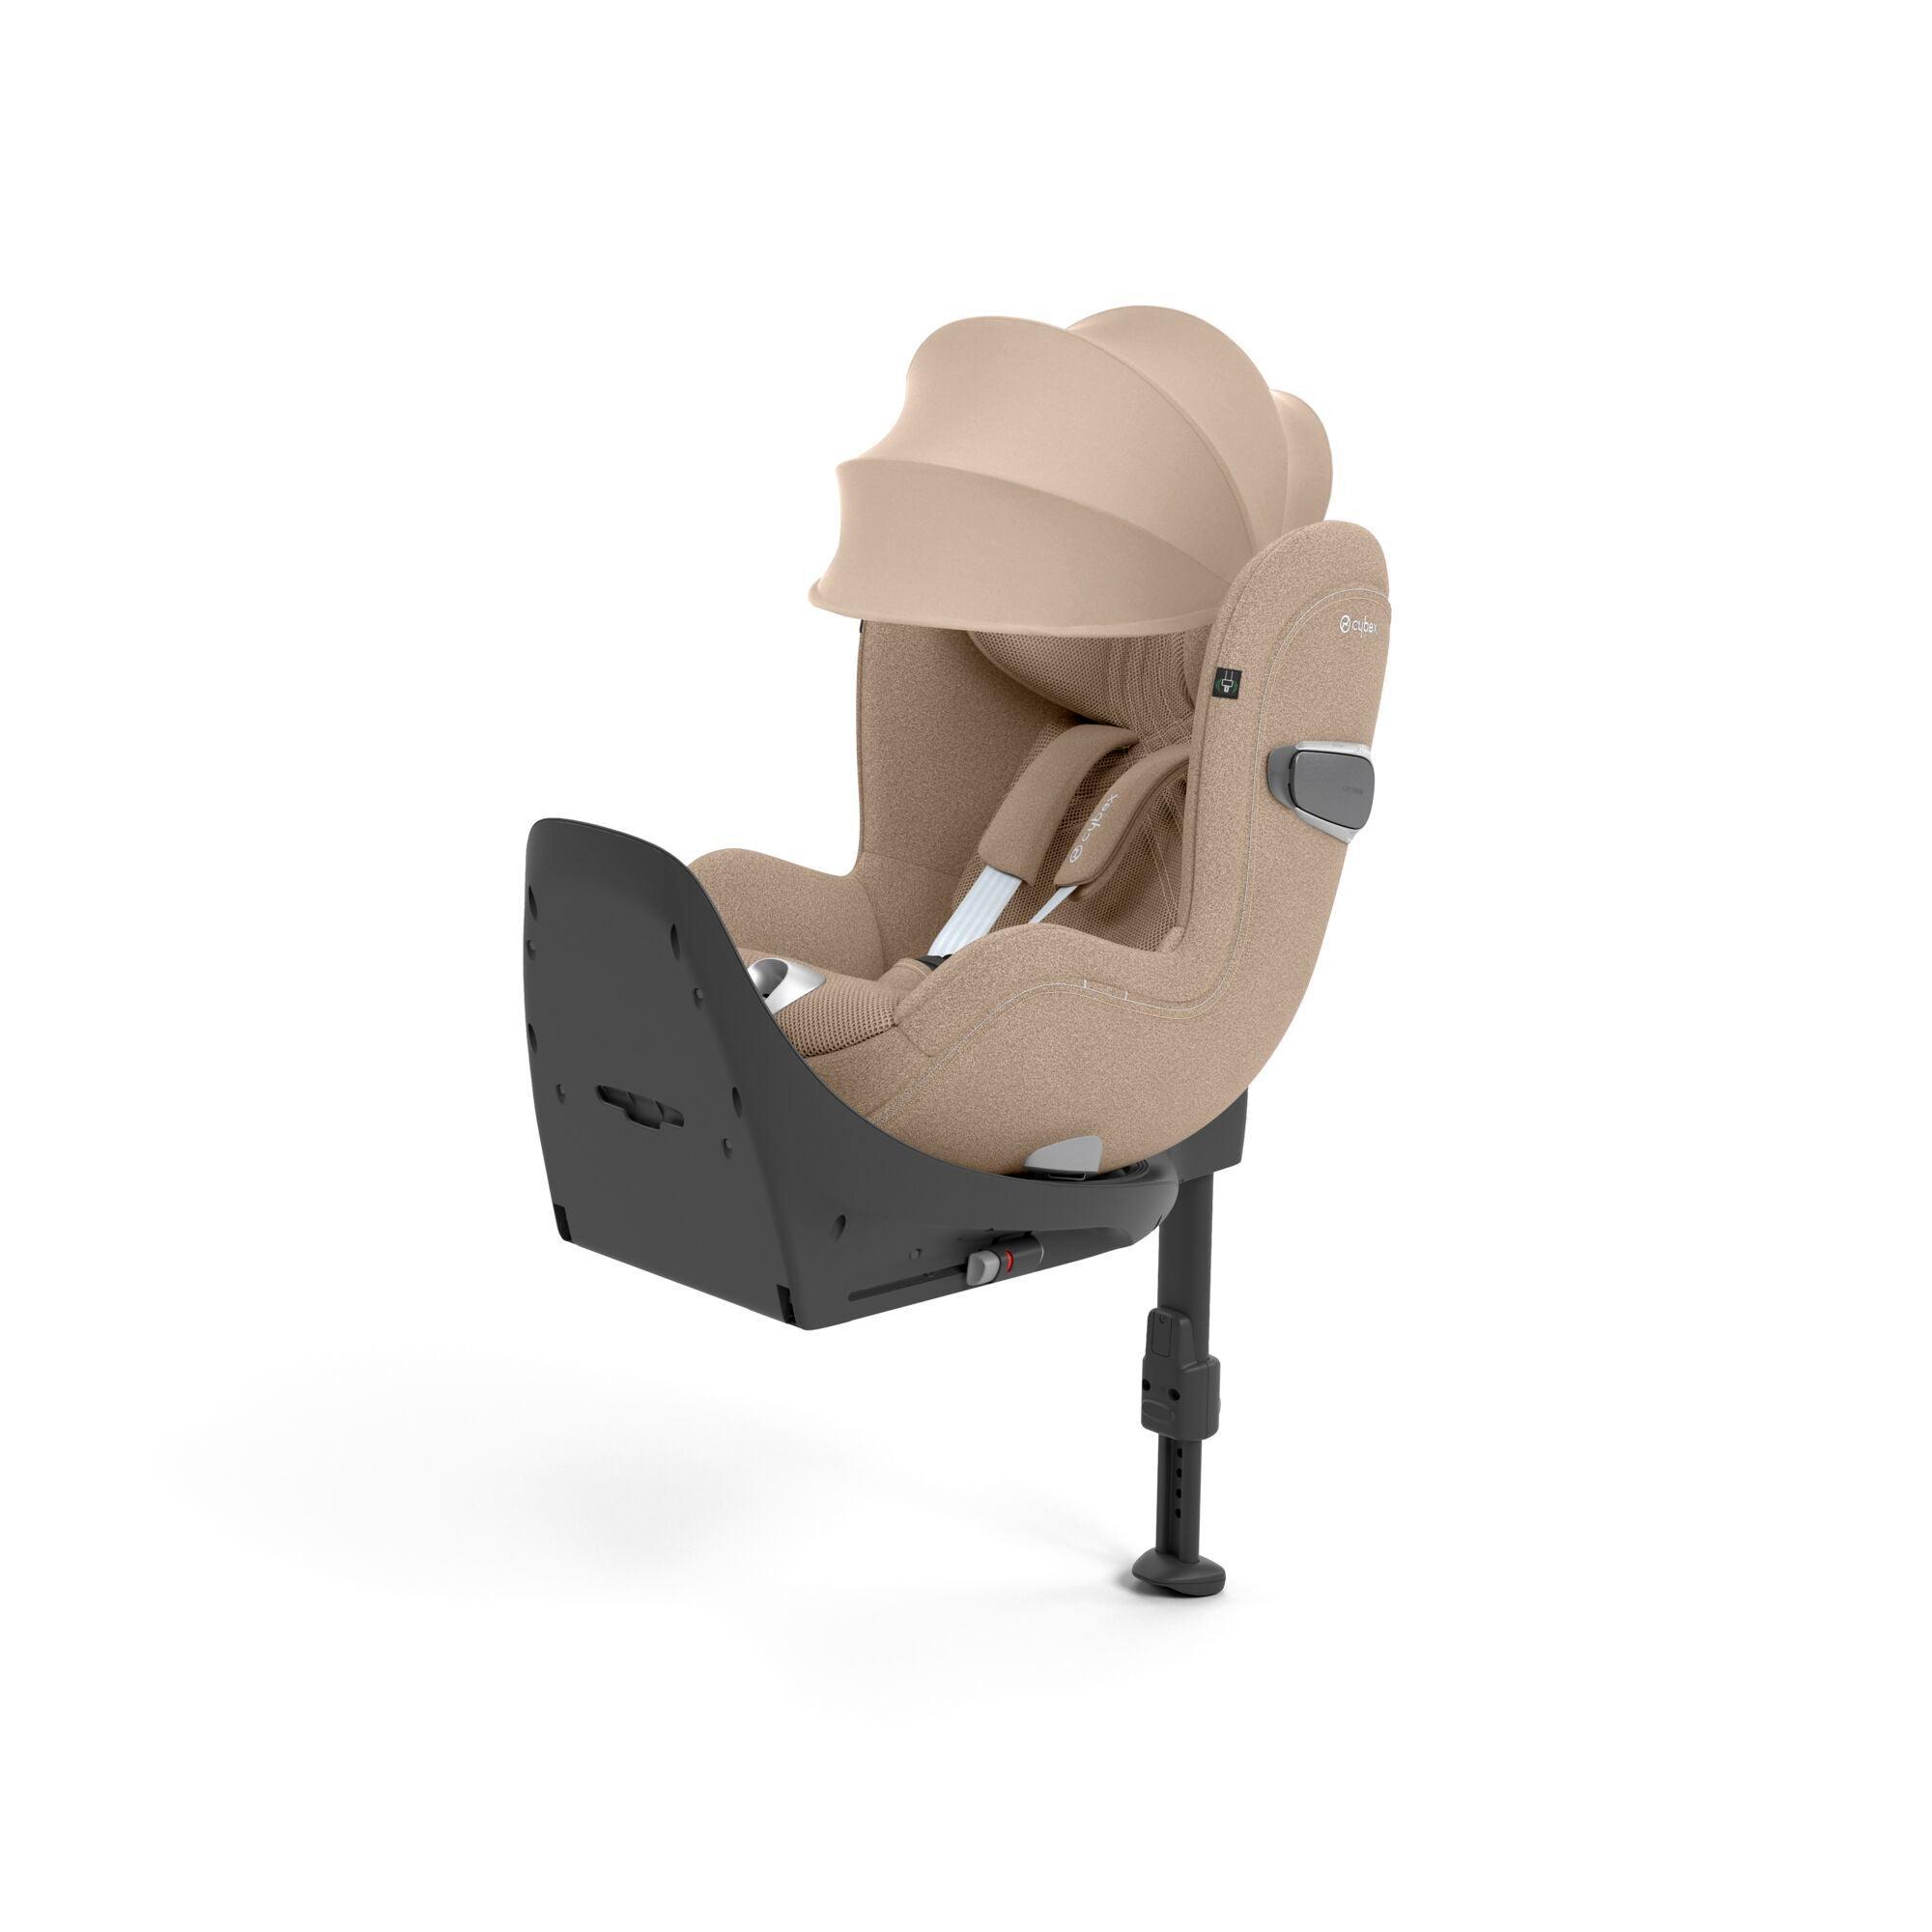 CYBEX Sirona T i-Size car seat in Cozy Beige, featuring a plush seat with an extendable sun canopy, safety harness, and an Isofix base with load leg for secure vehicle installation.